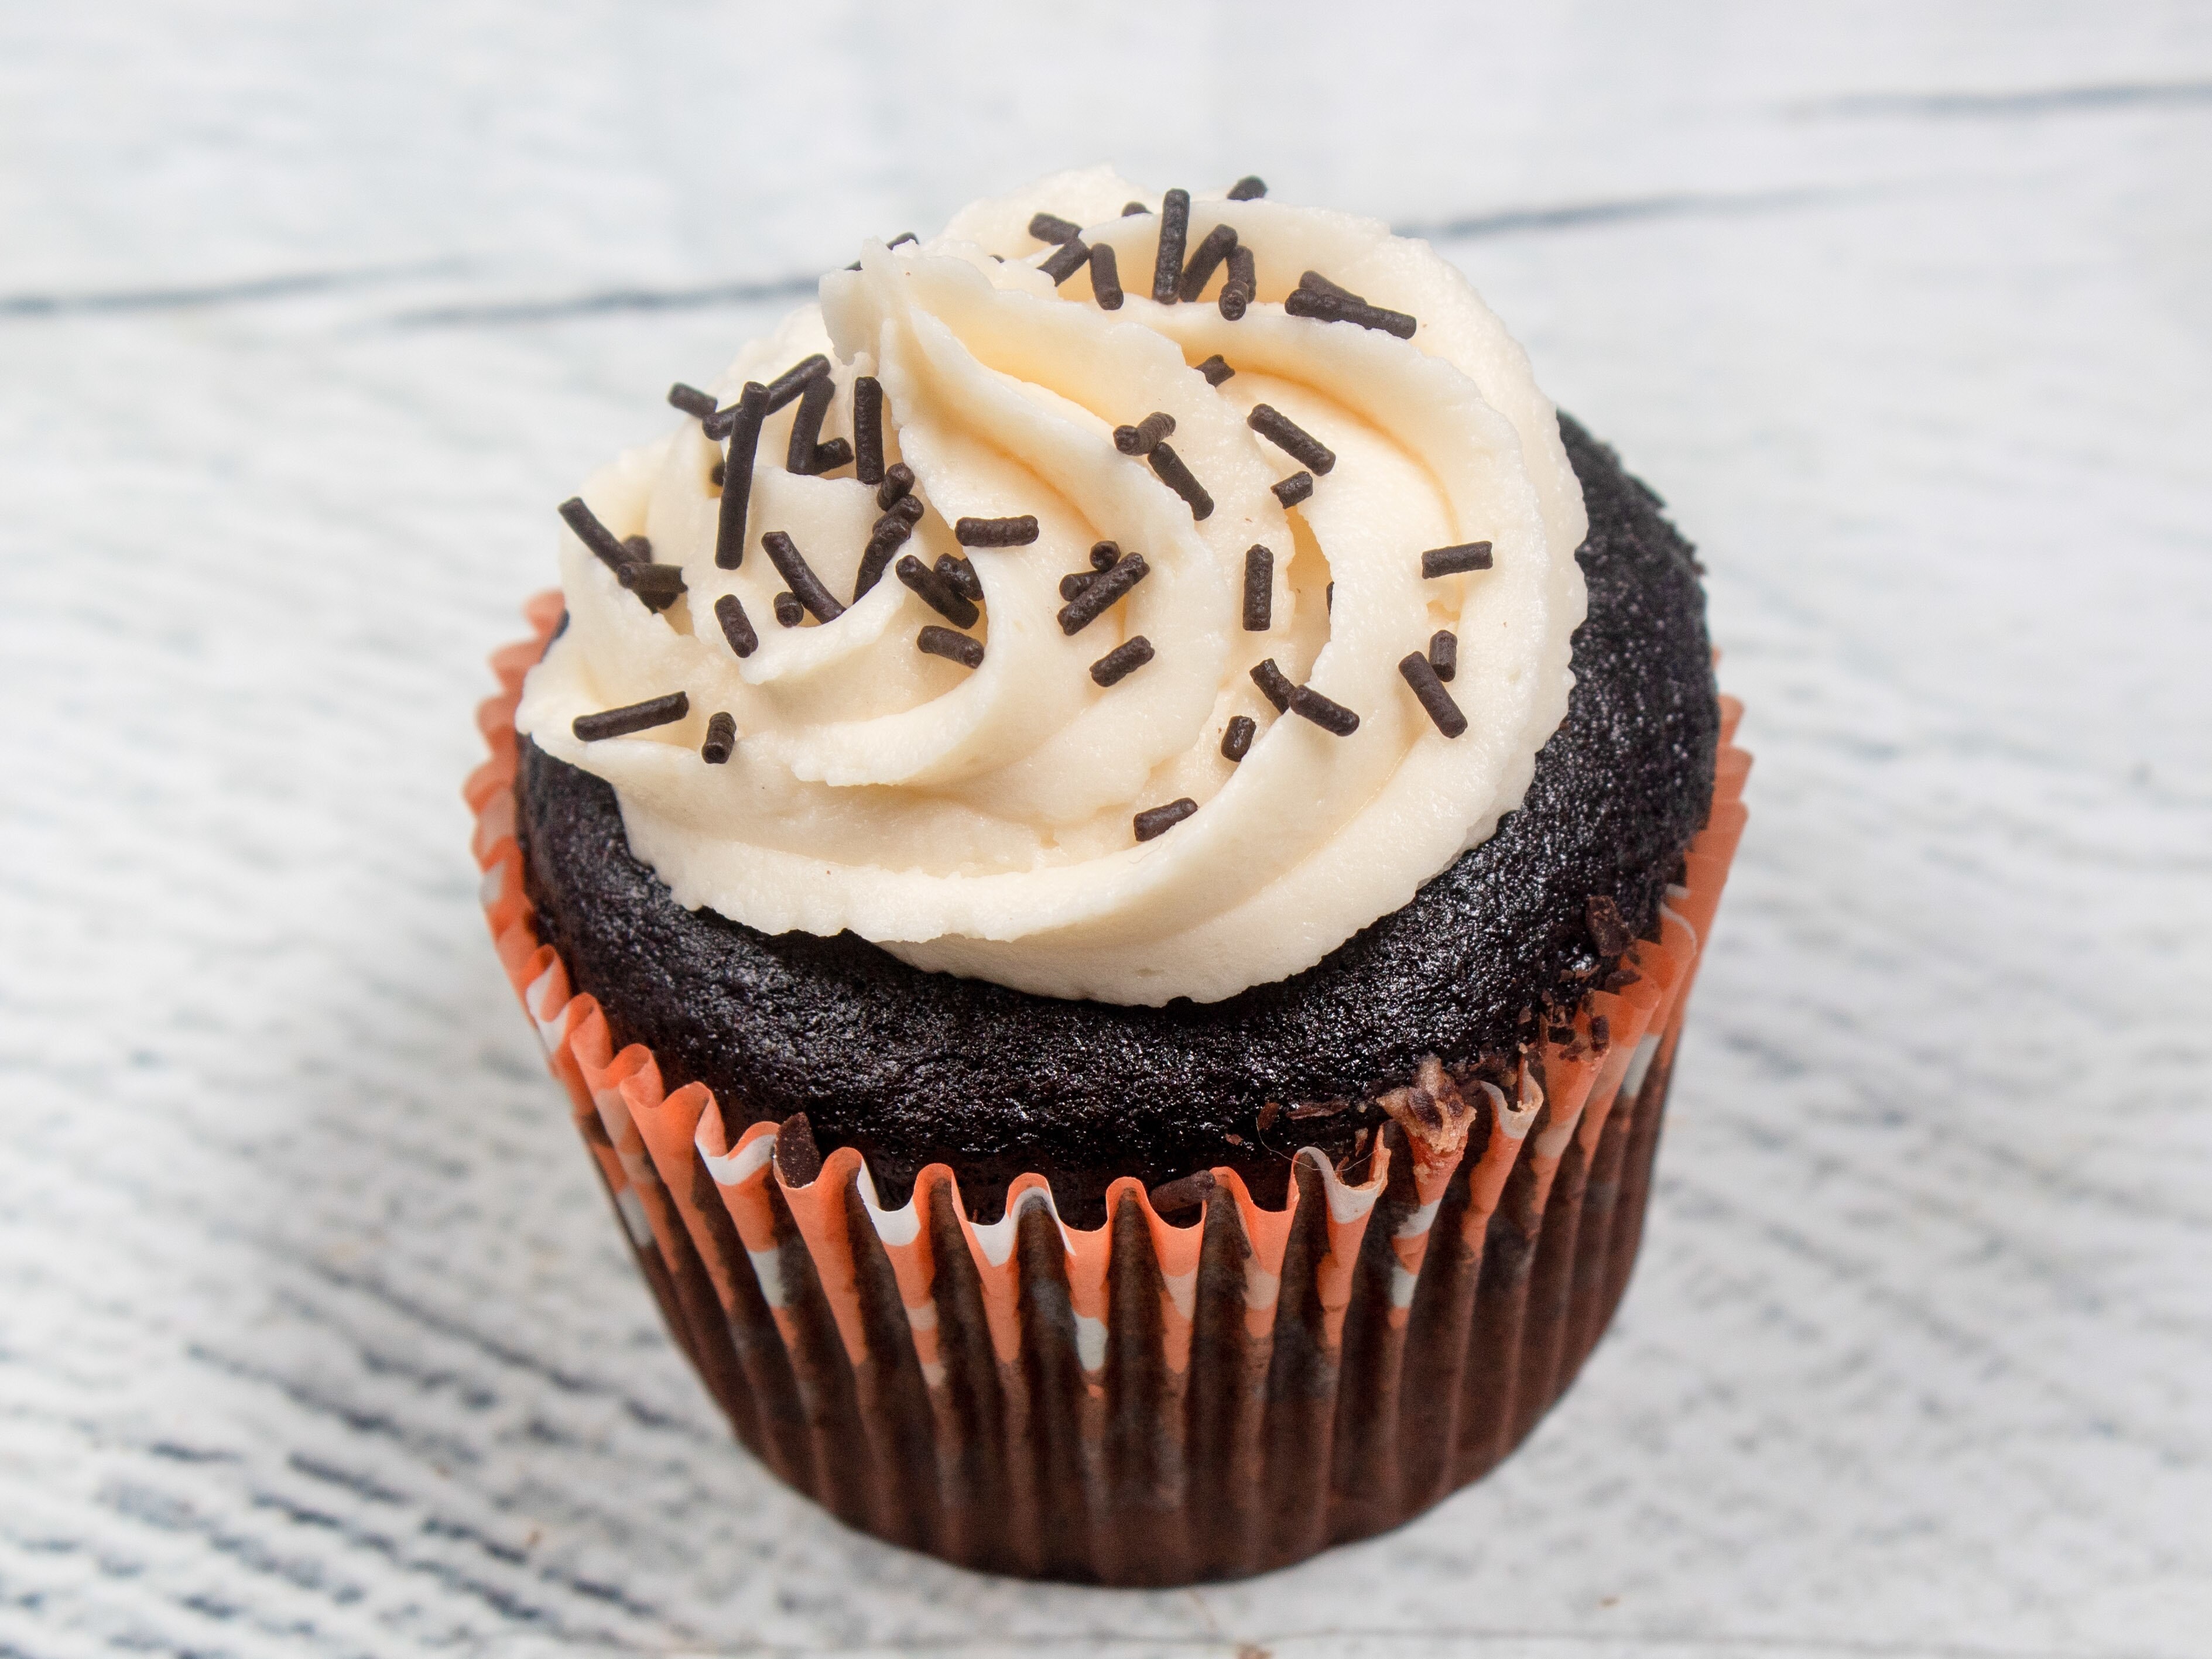 Cupcake Places In Ahmedabad | Cupcakes, Desserts, Chocolate, Sweet tooth